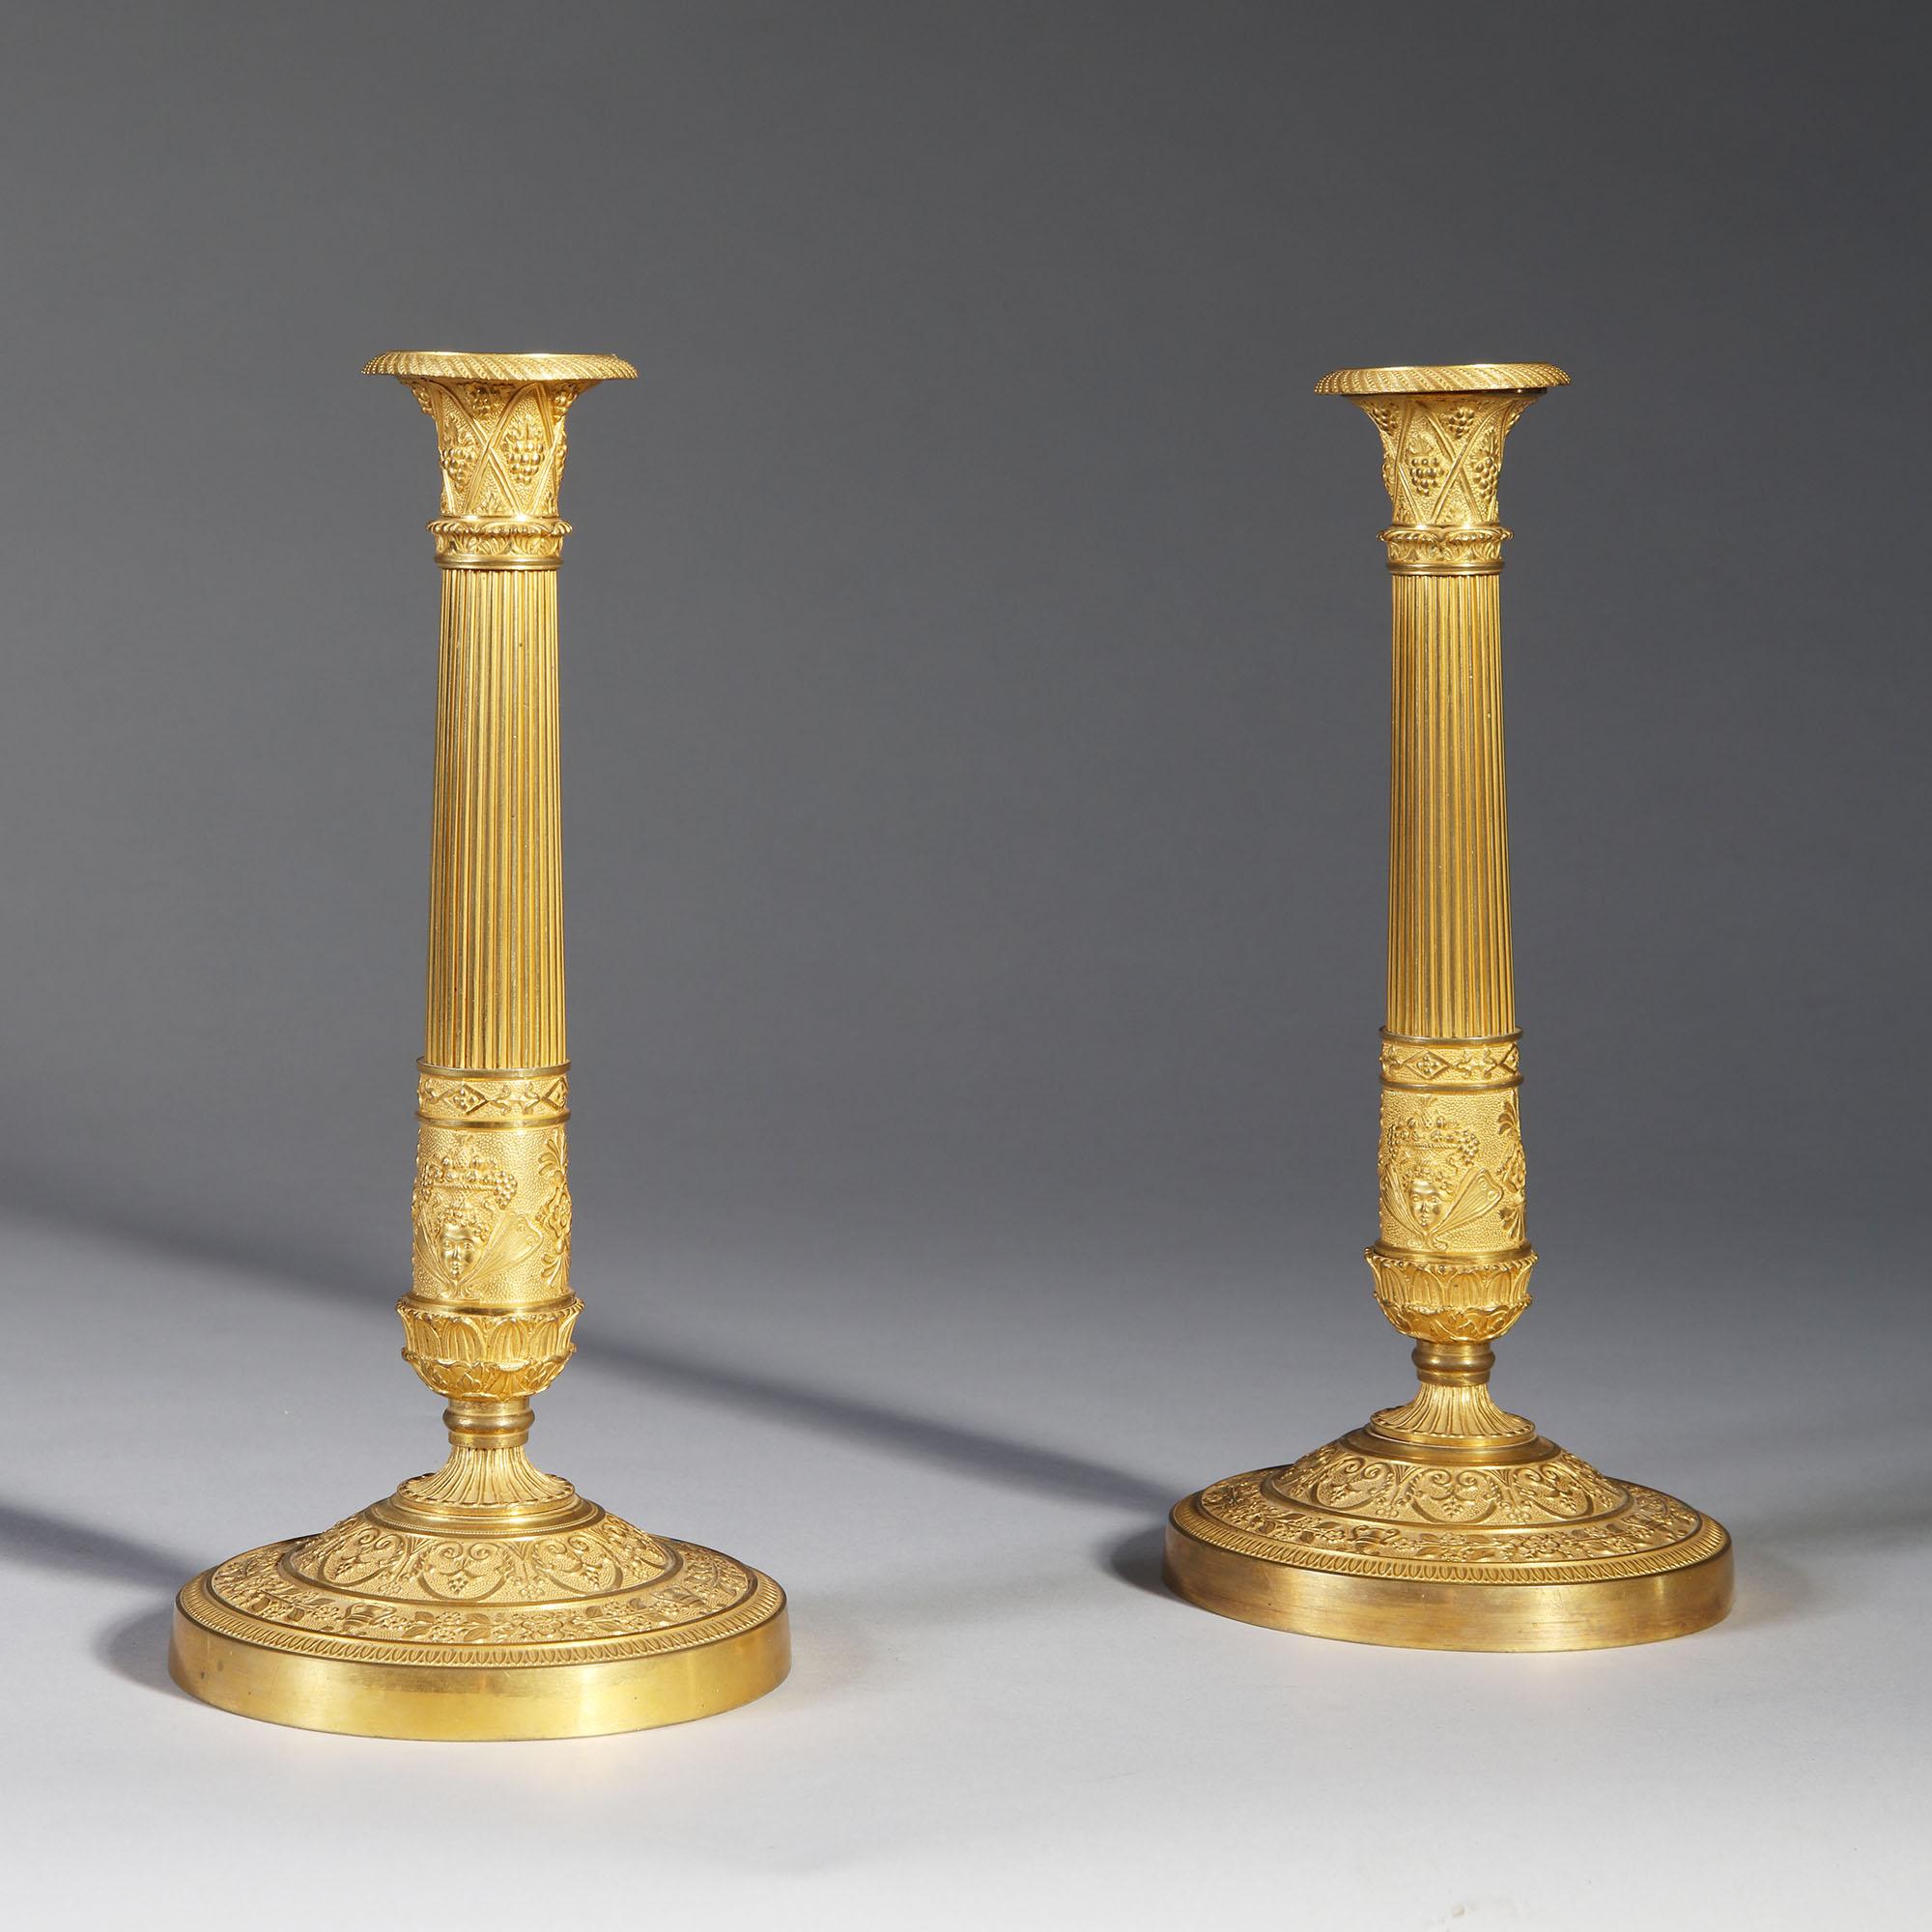 Pair of French Empire Candlesticks, Gilt Bronze Early 19th Century Desk Lamps 2